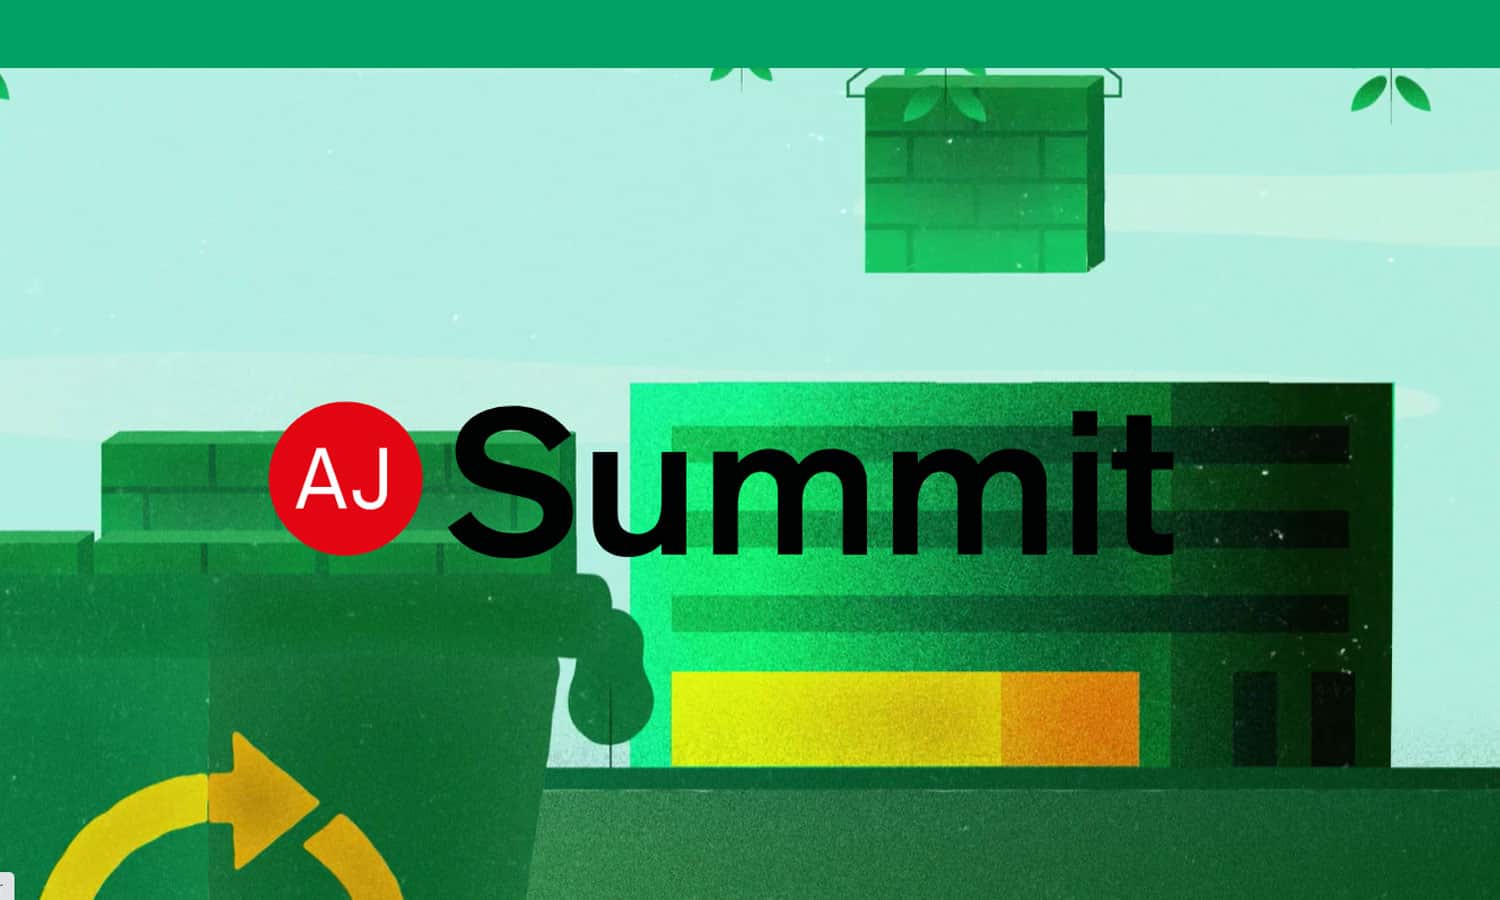 James Traynor to Present at the AJ Summit to be held in association with the AJ’s RetroFirst Campaign